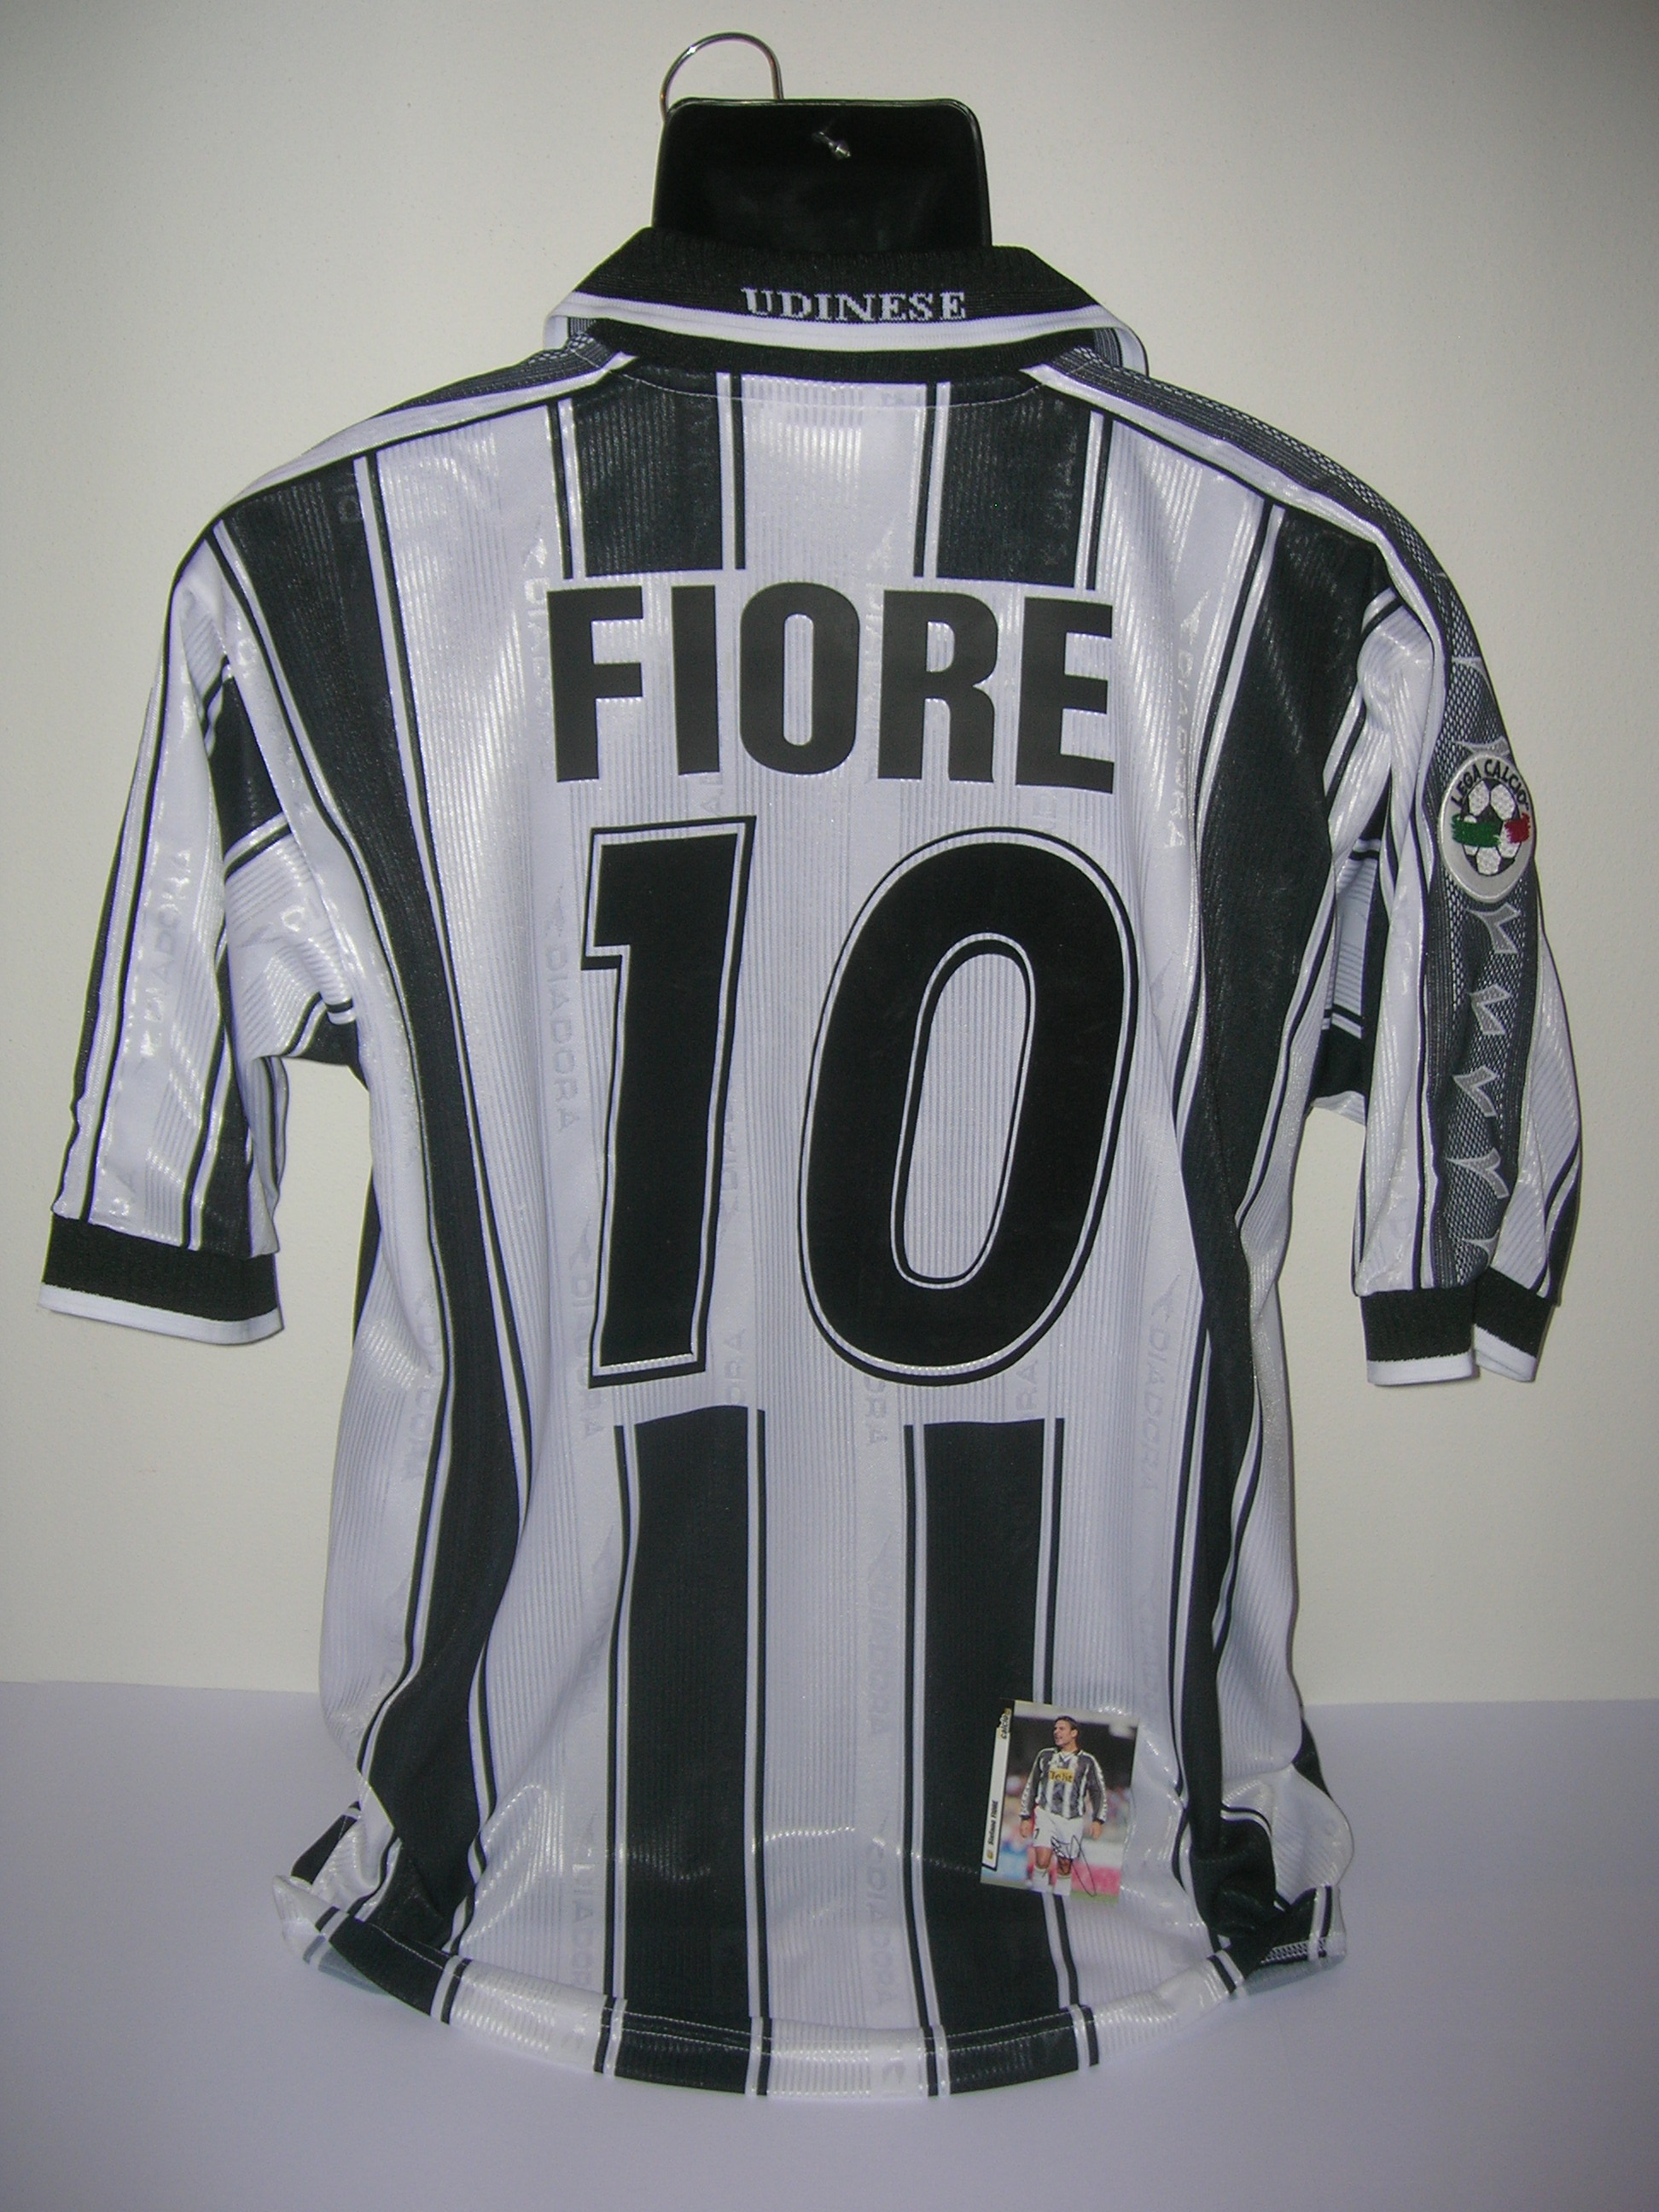 Udinese Fiore  10  A-2